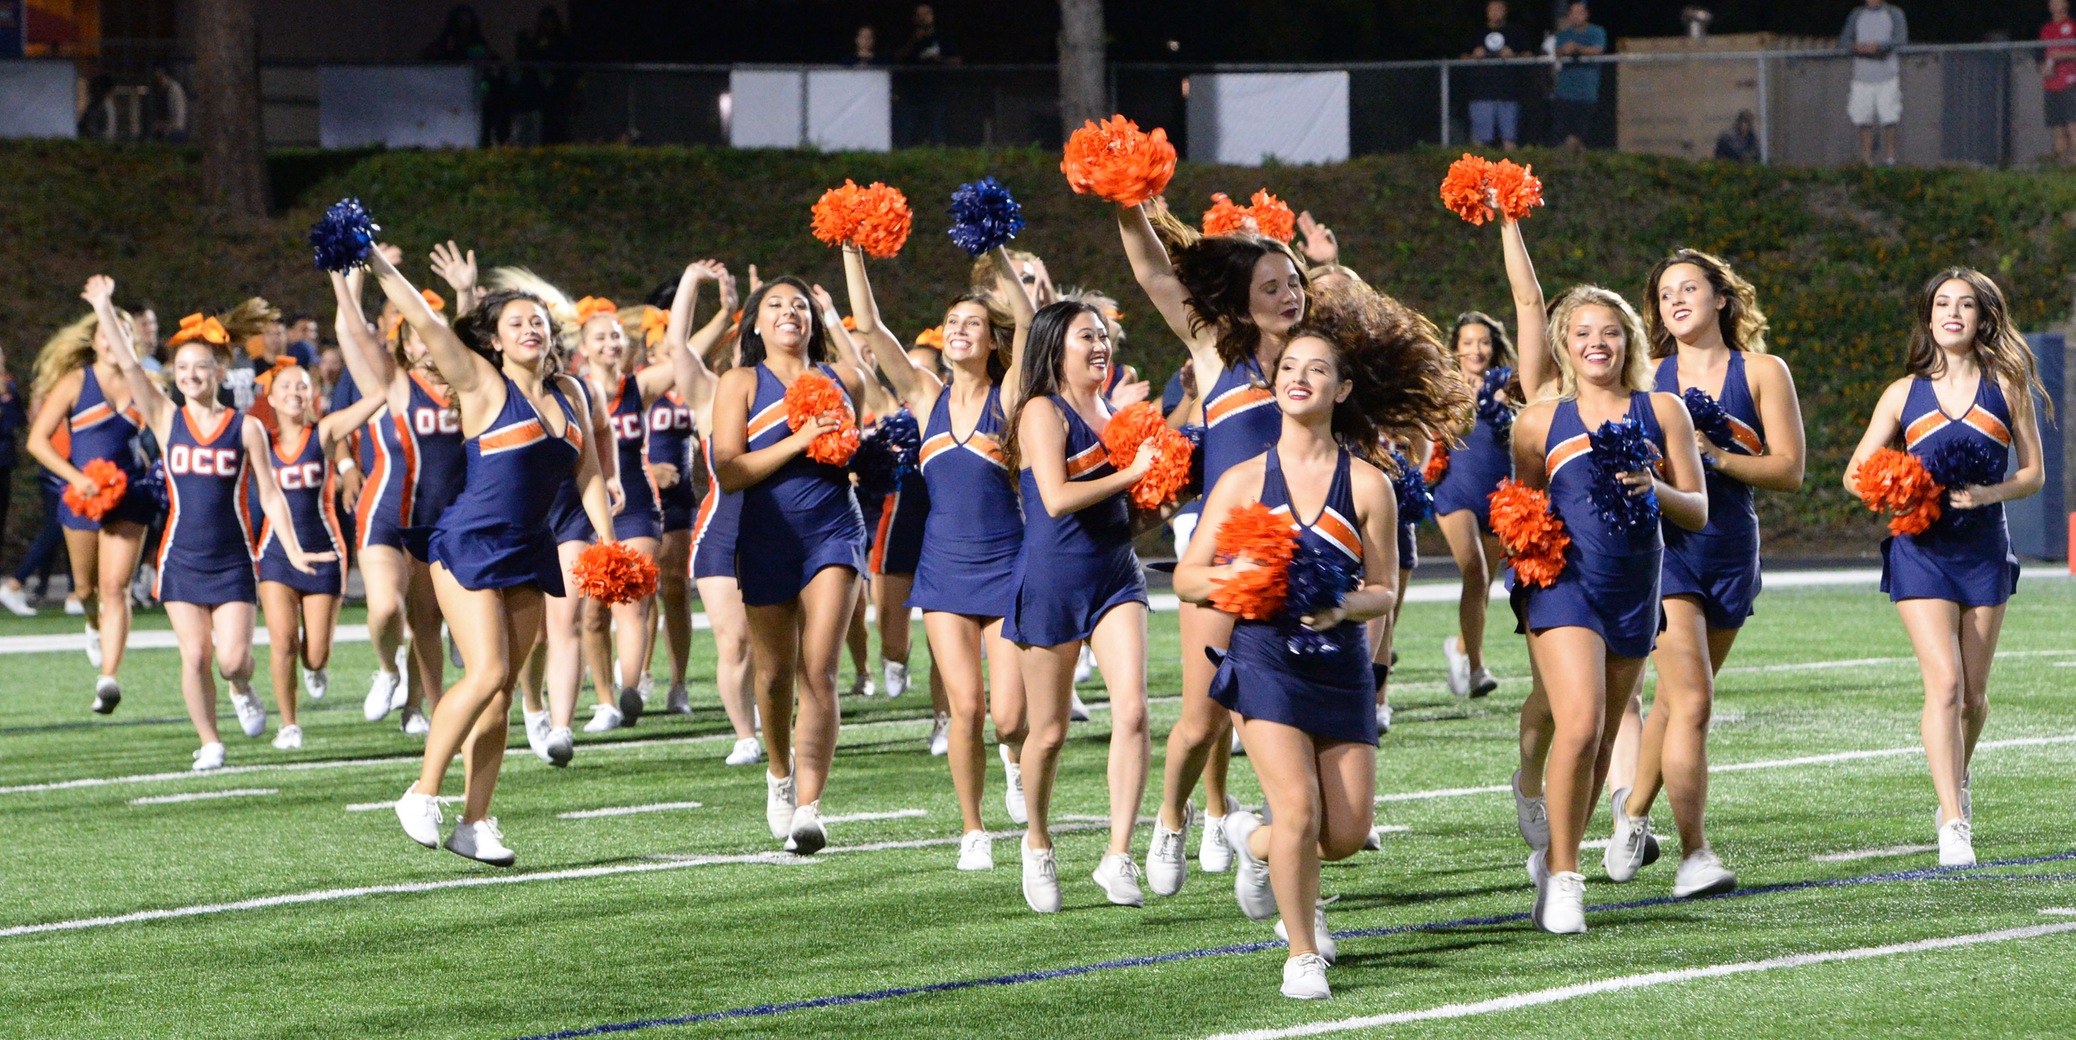 Cheer and Dance auditions set for May 11